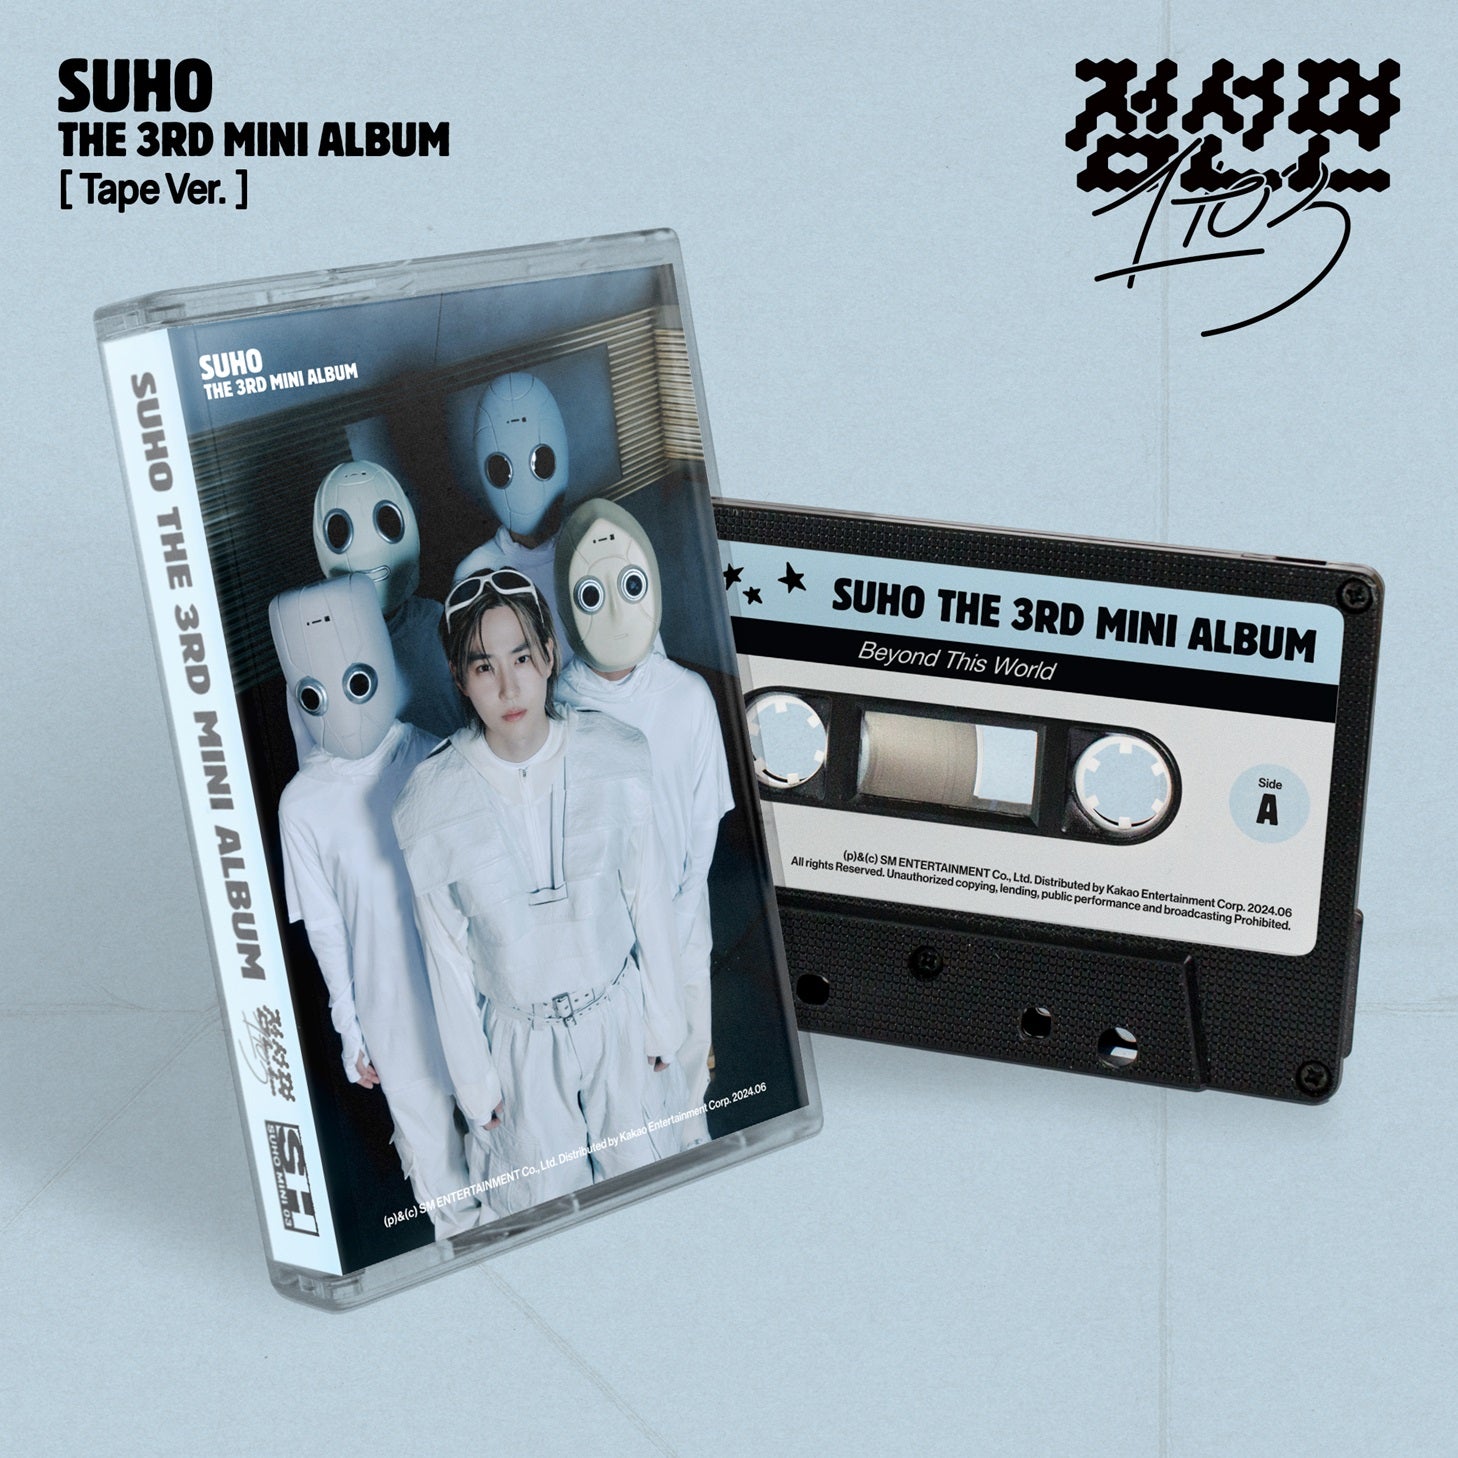 SUHO - 1 TO 3 MINI 3RD ALBUM TAPE VER